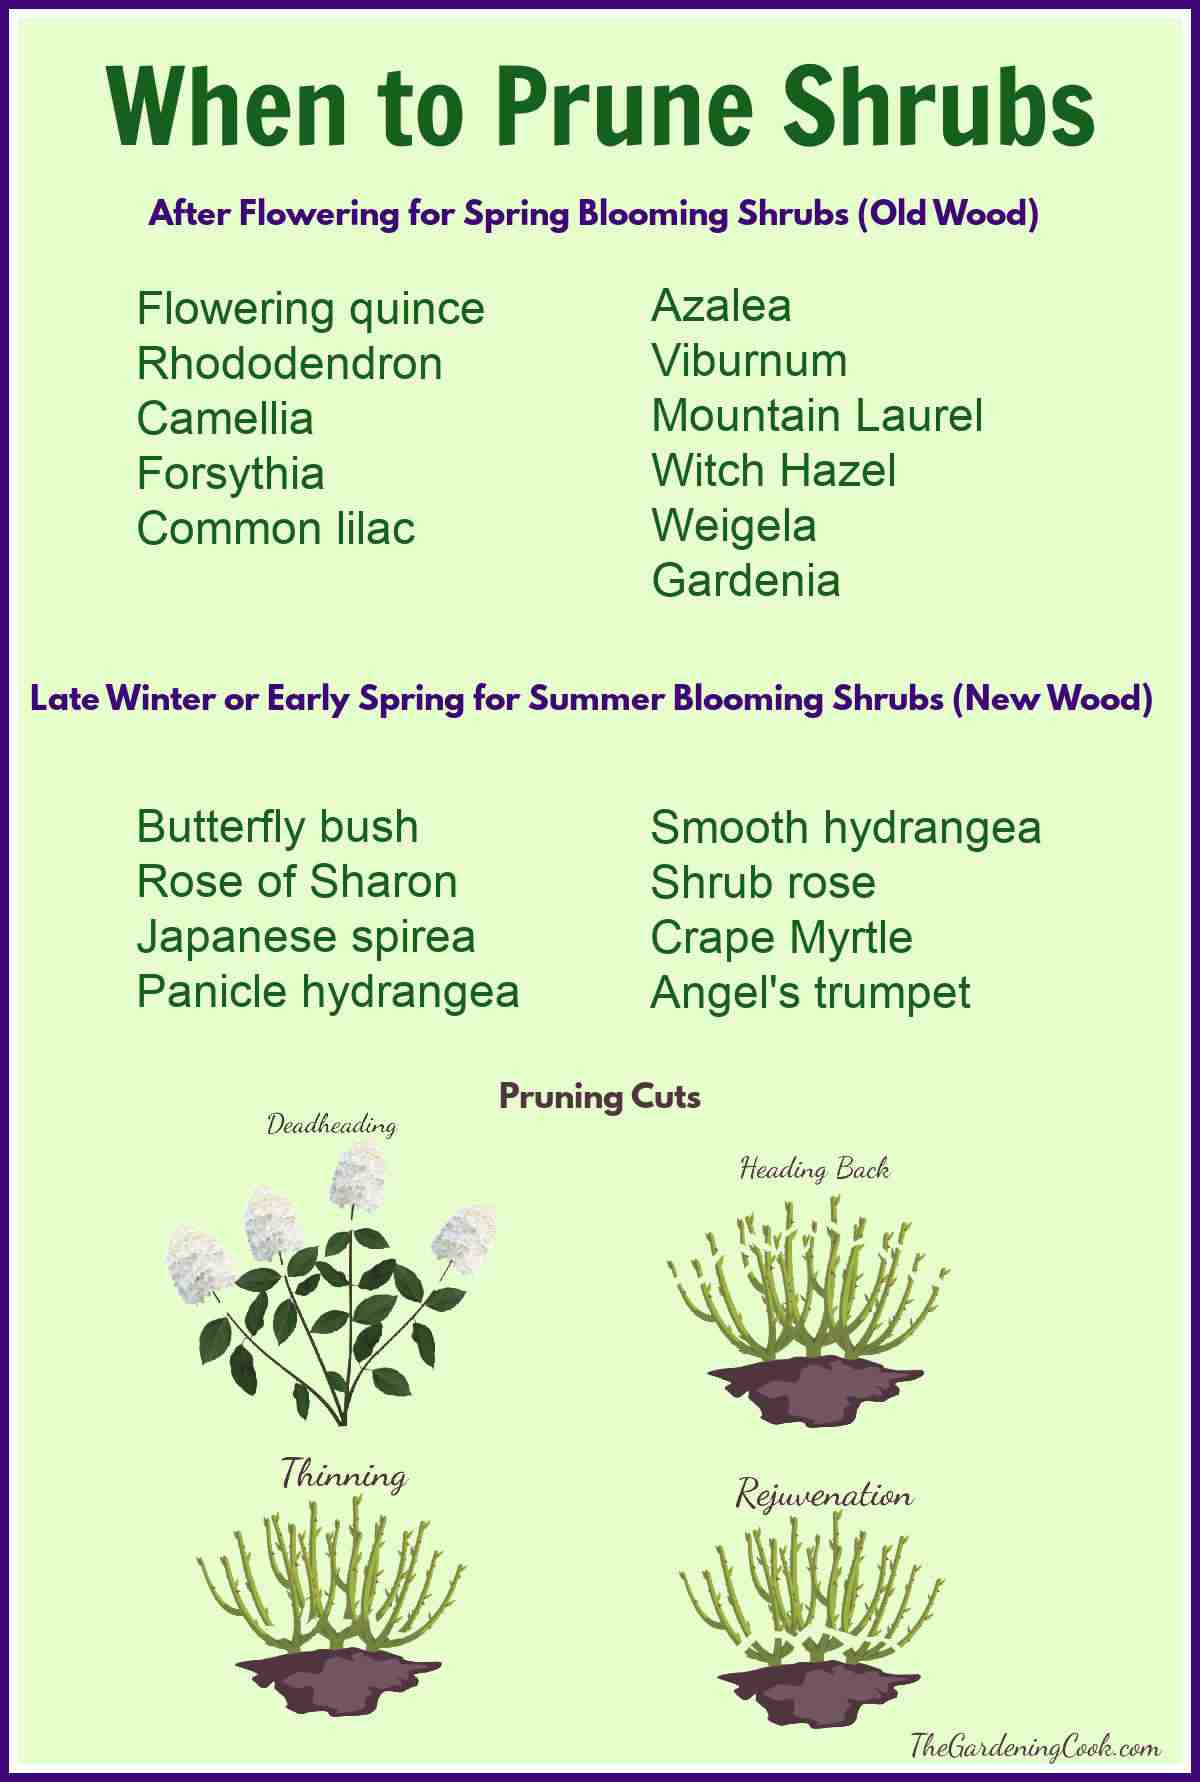 Printable showing types of pruning cuts and when to prune each type of shrub - both old and new wood.